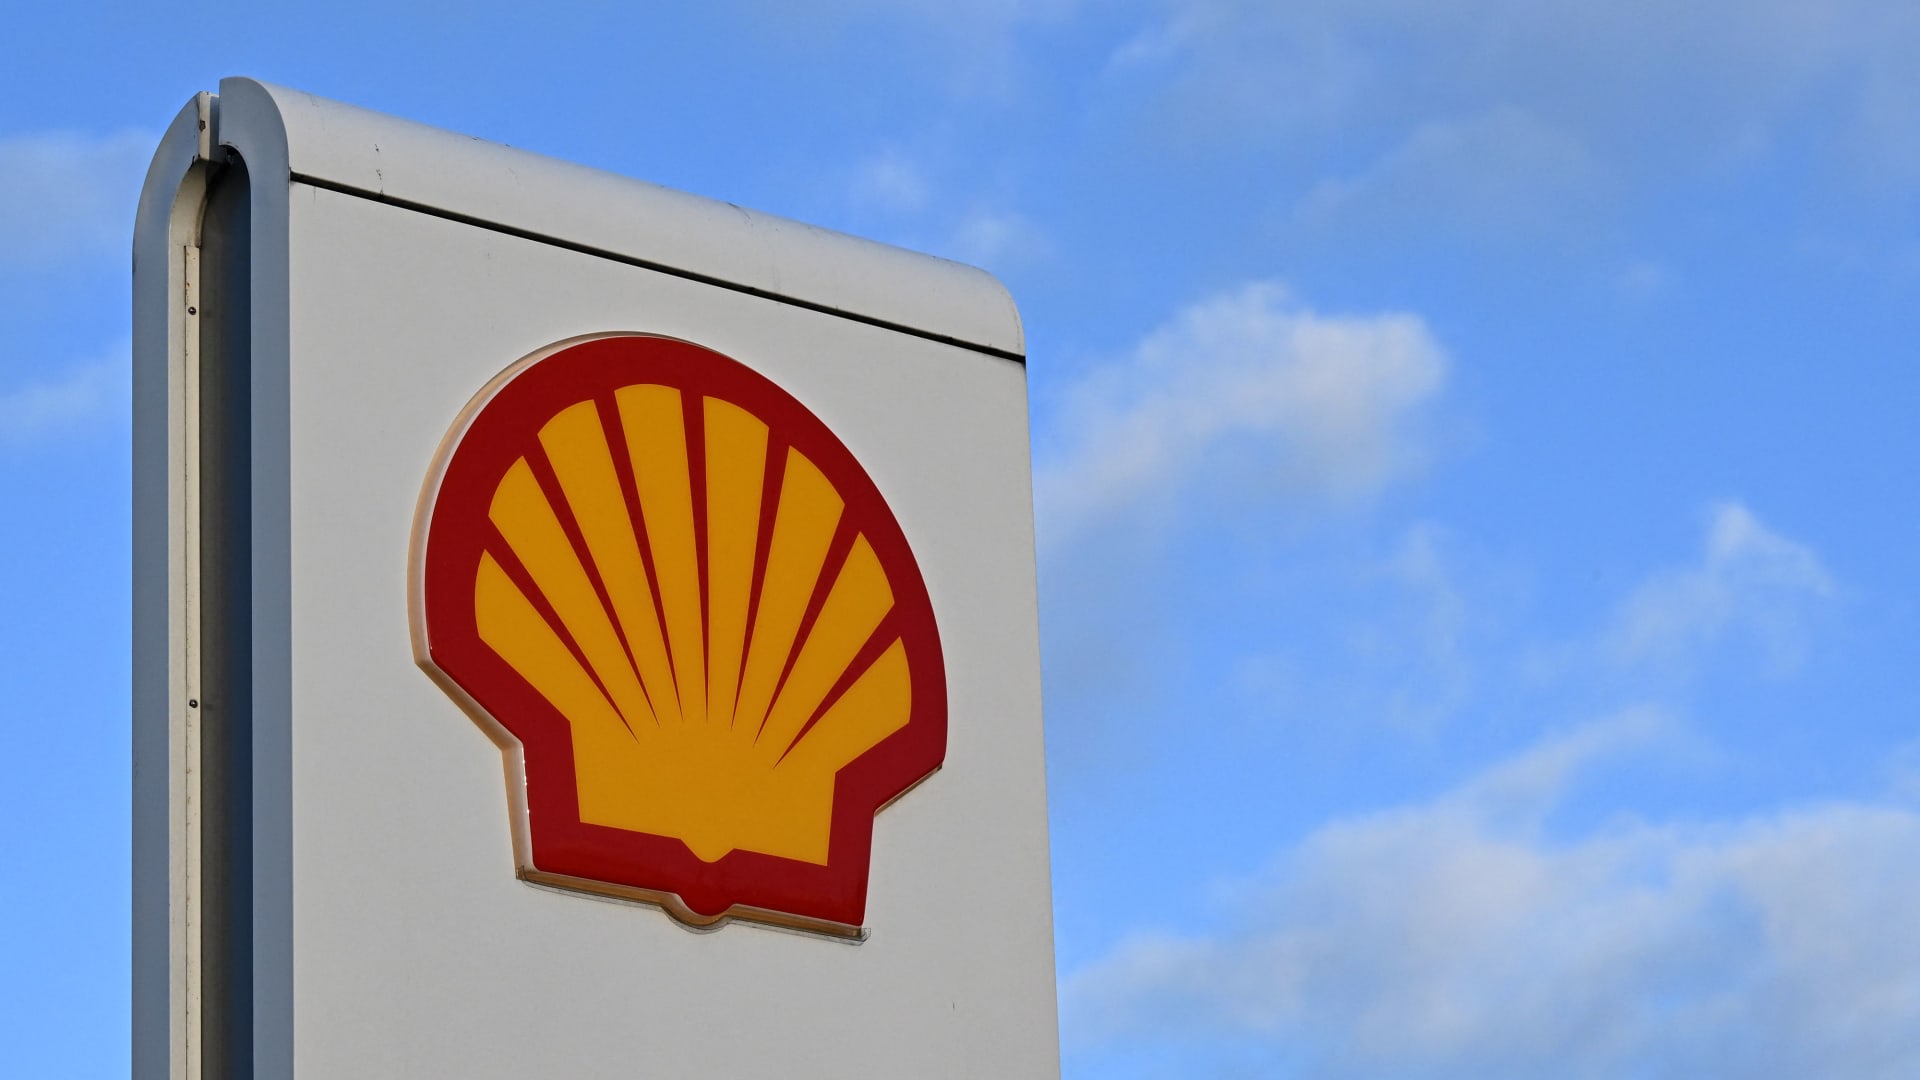 Oil giant Shell posts highest-ever annual profit of $40 billion - CNBC